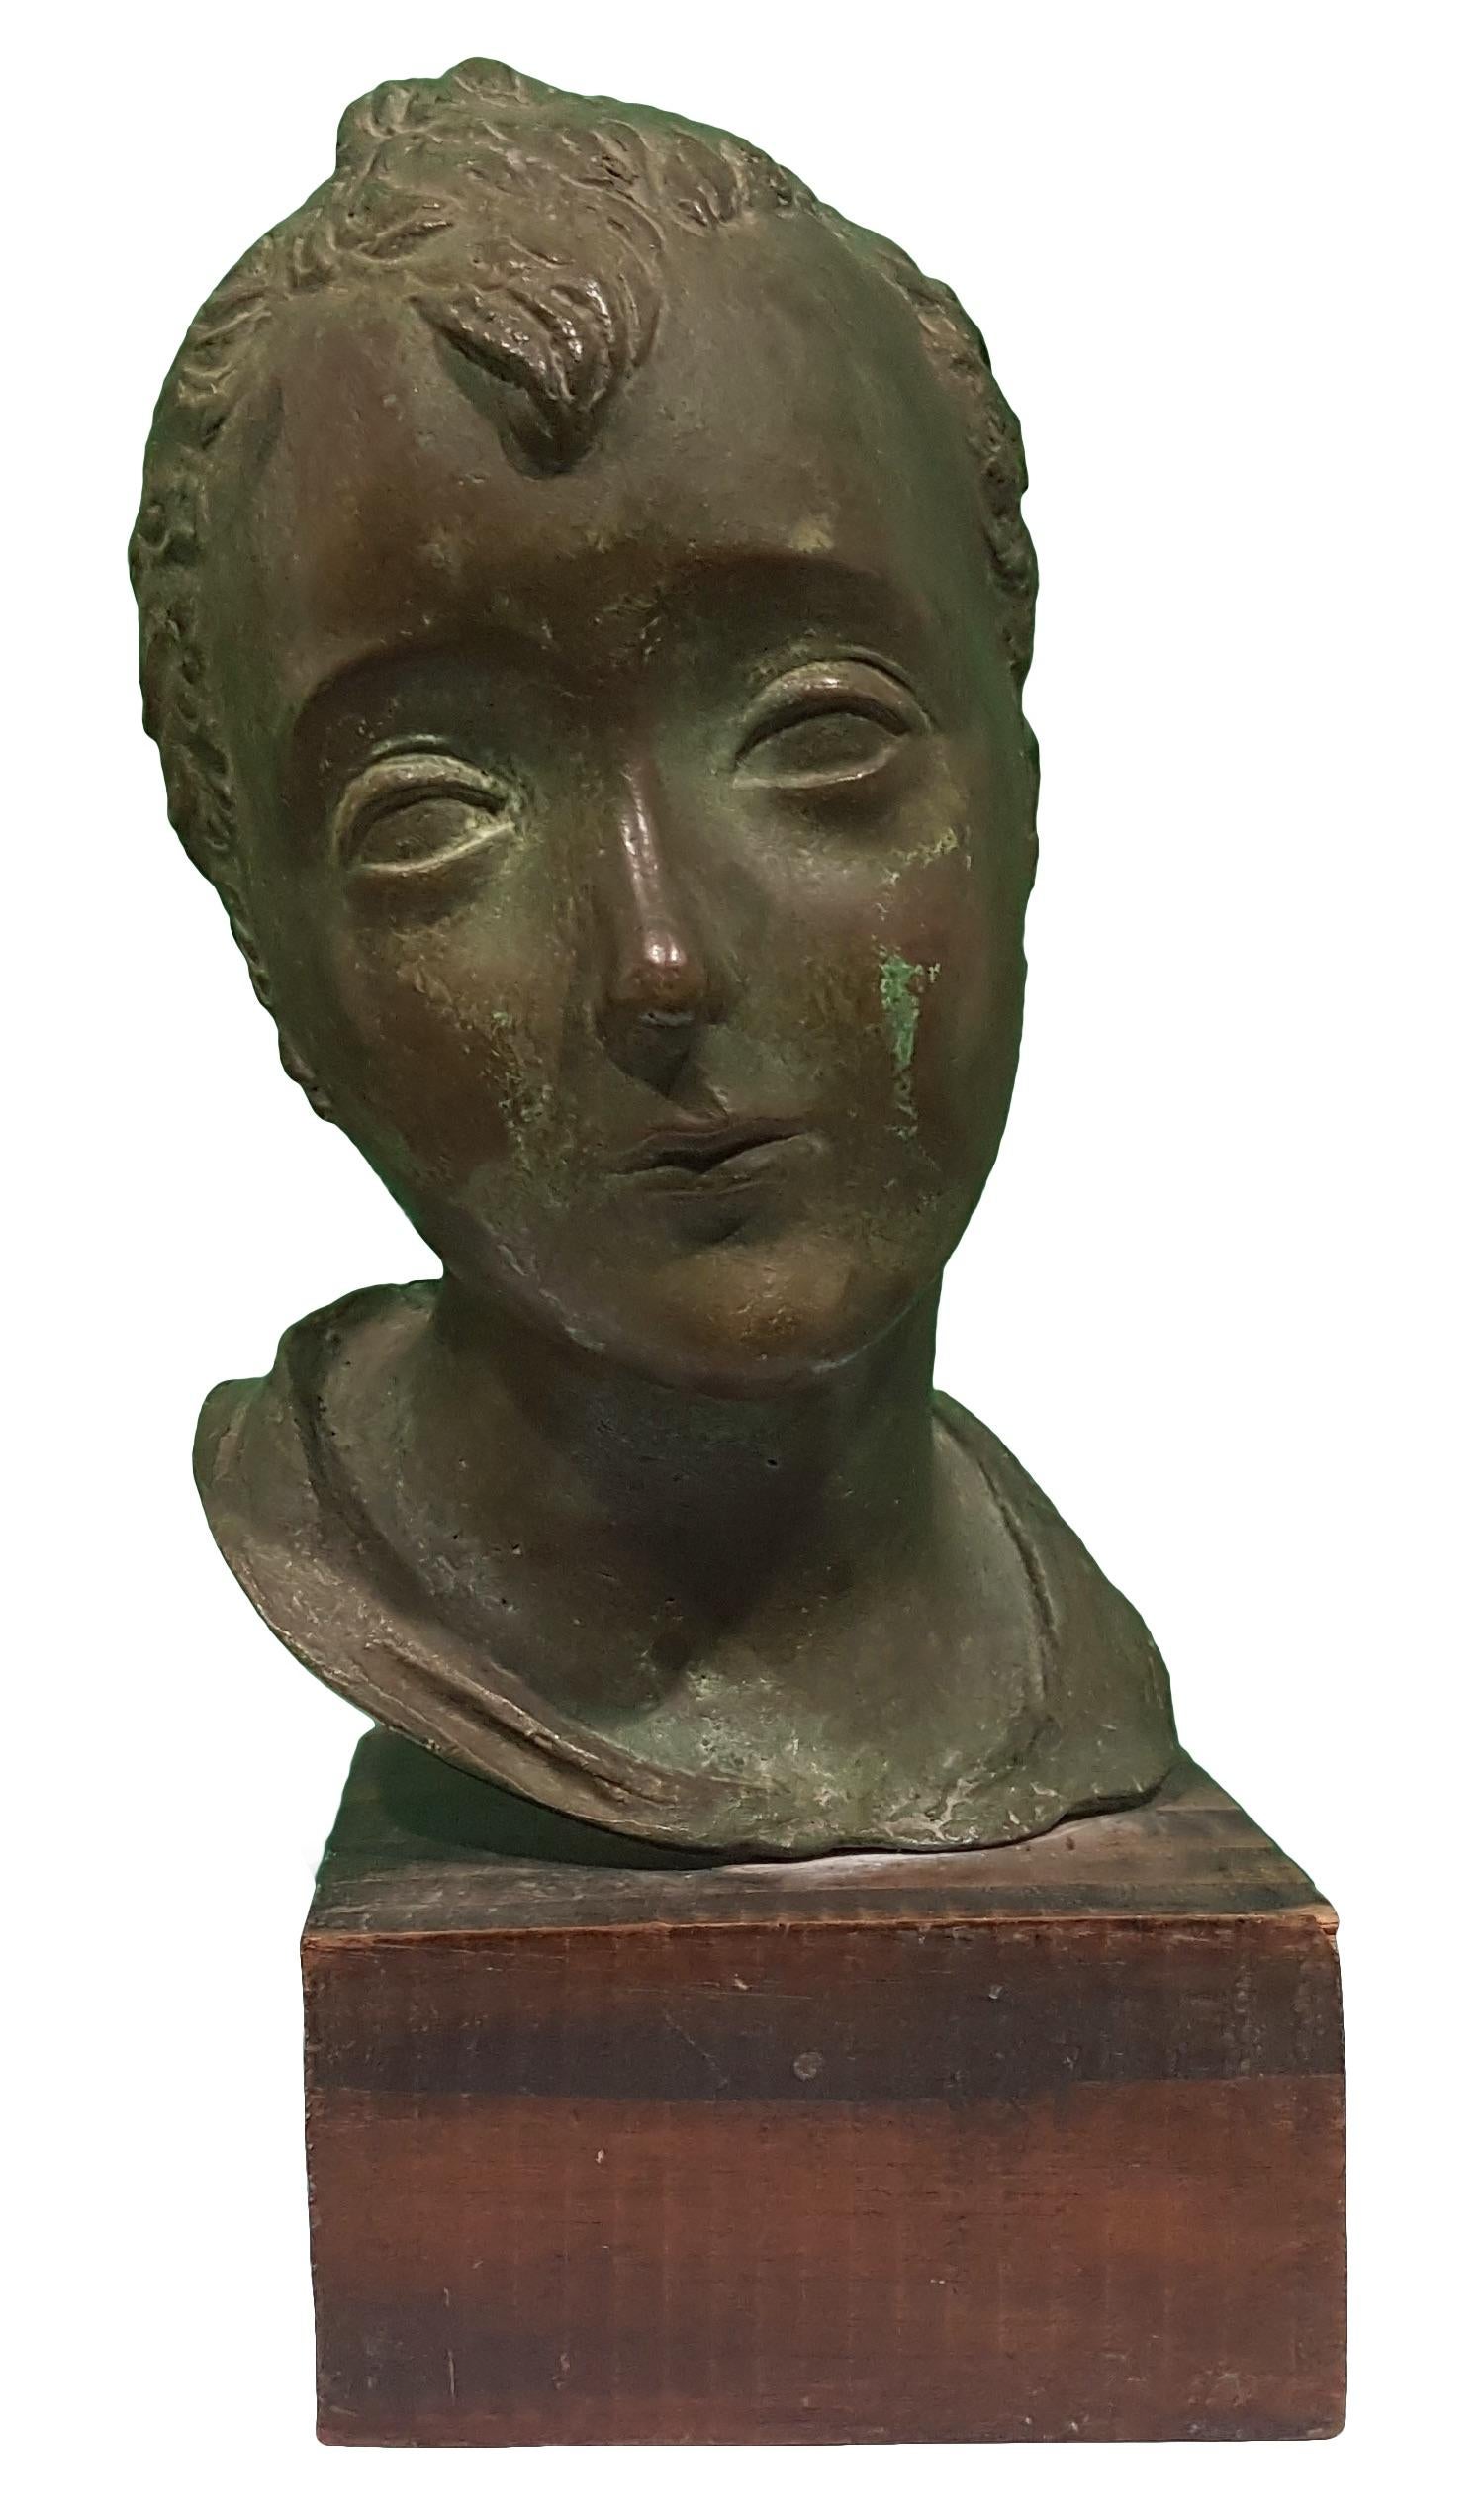 Bronze sculpture with green glaze and wooden base by the Italian sculpture Attilio Torresini (1884-1961).
Signed on rear: A. Torresini
Measures: Cm. 27 x 13 x 13 - Wooden base 5.5 x 11 x 11. 

This artwork is shipped from Italy. Under existing